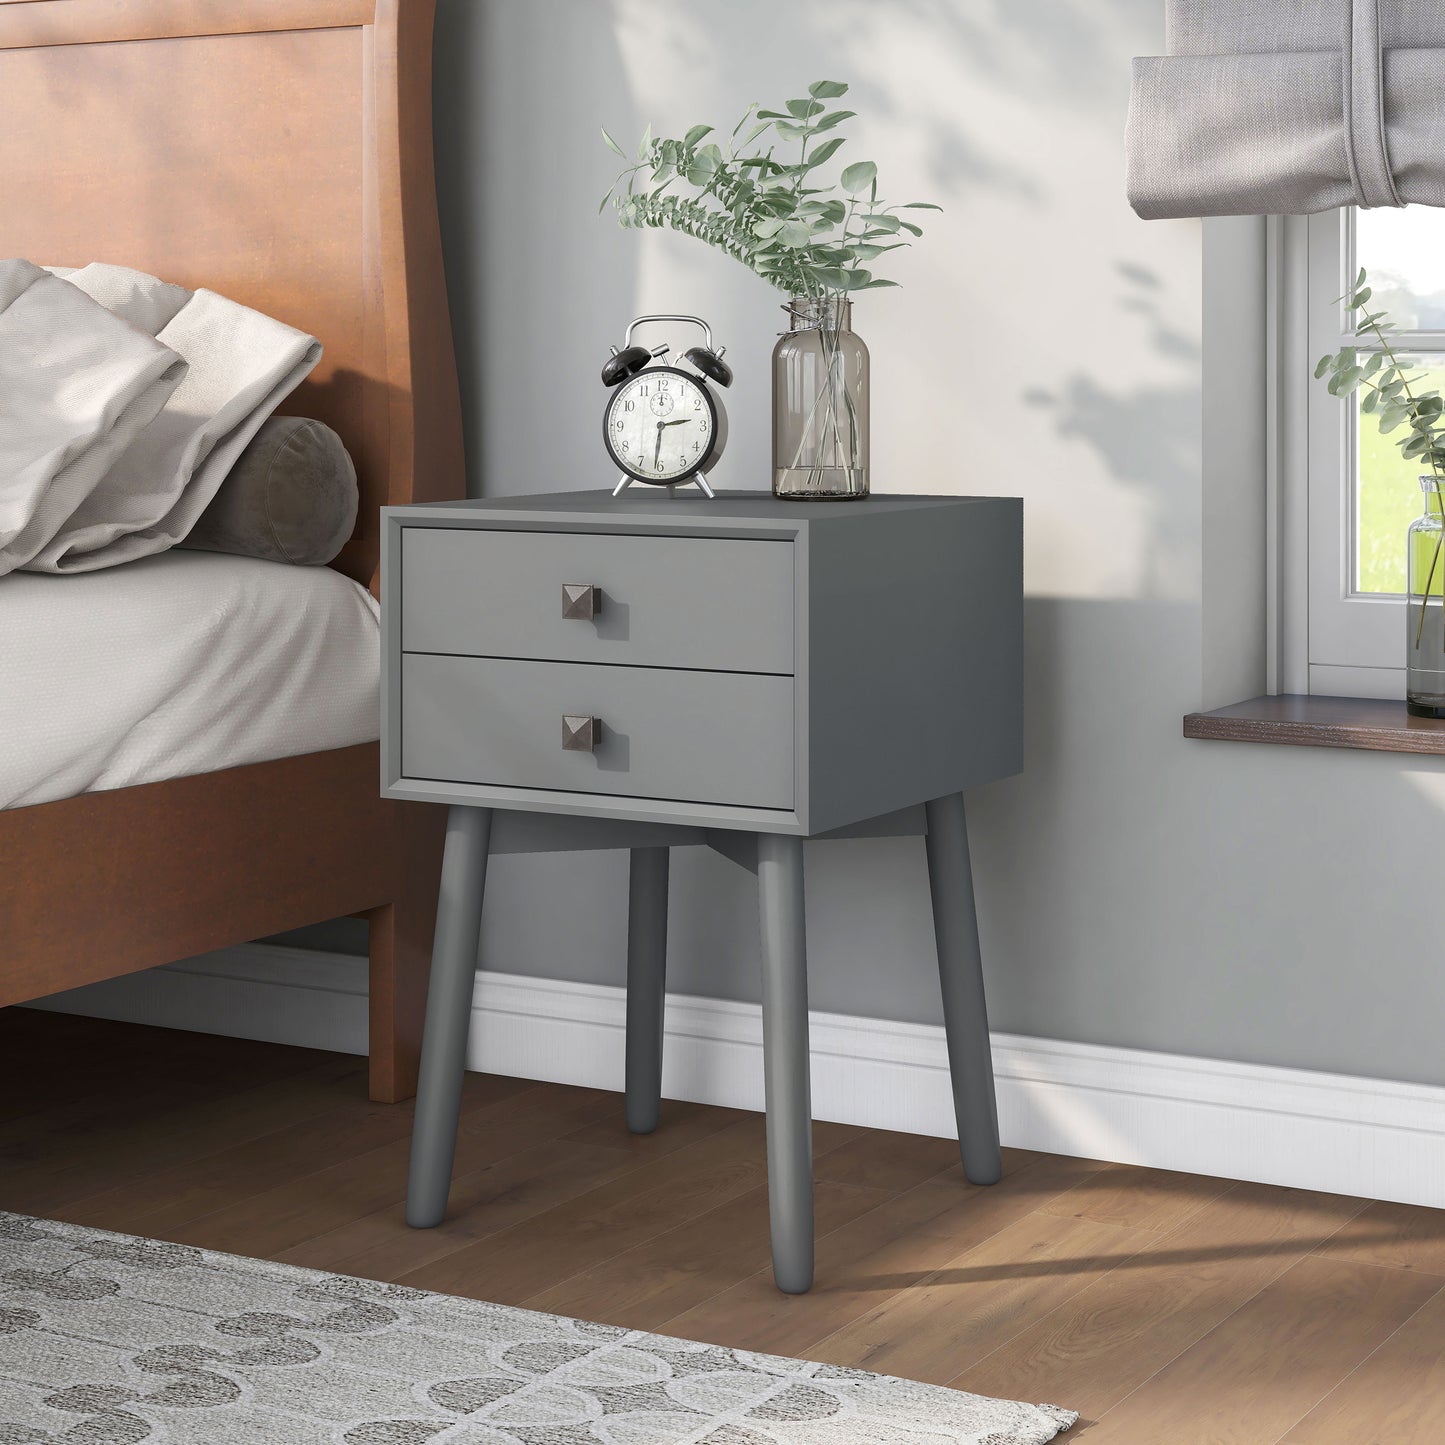 Left angled modern gray two-drawer compact nightstand with splayed legs in a bedroom with accessories